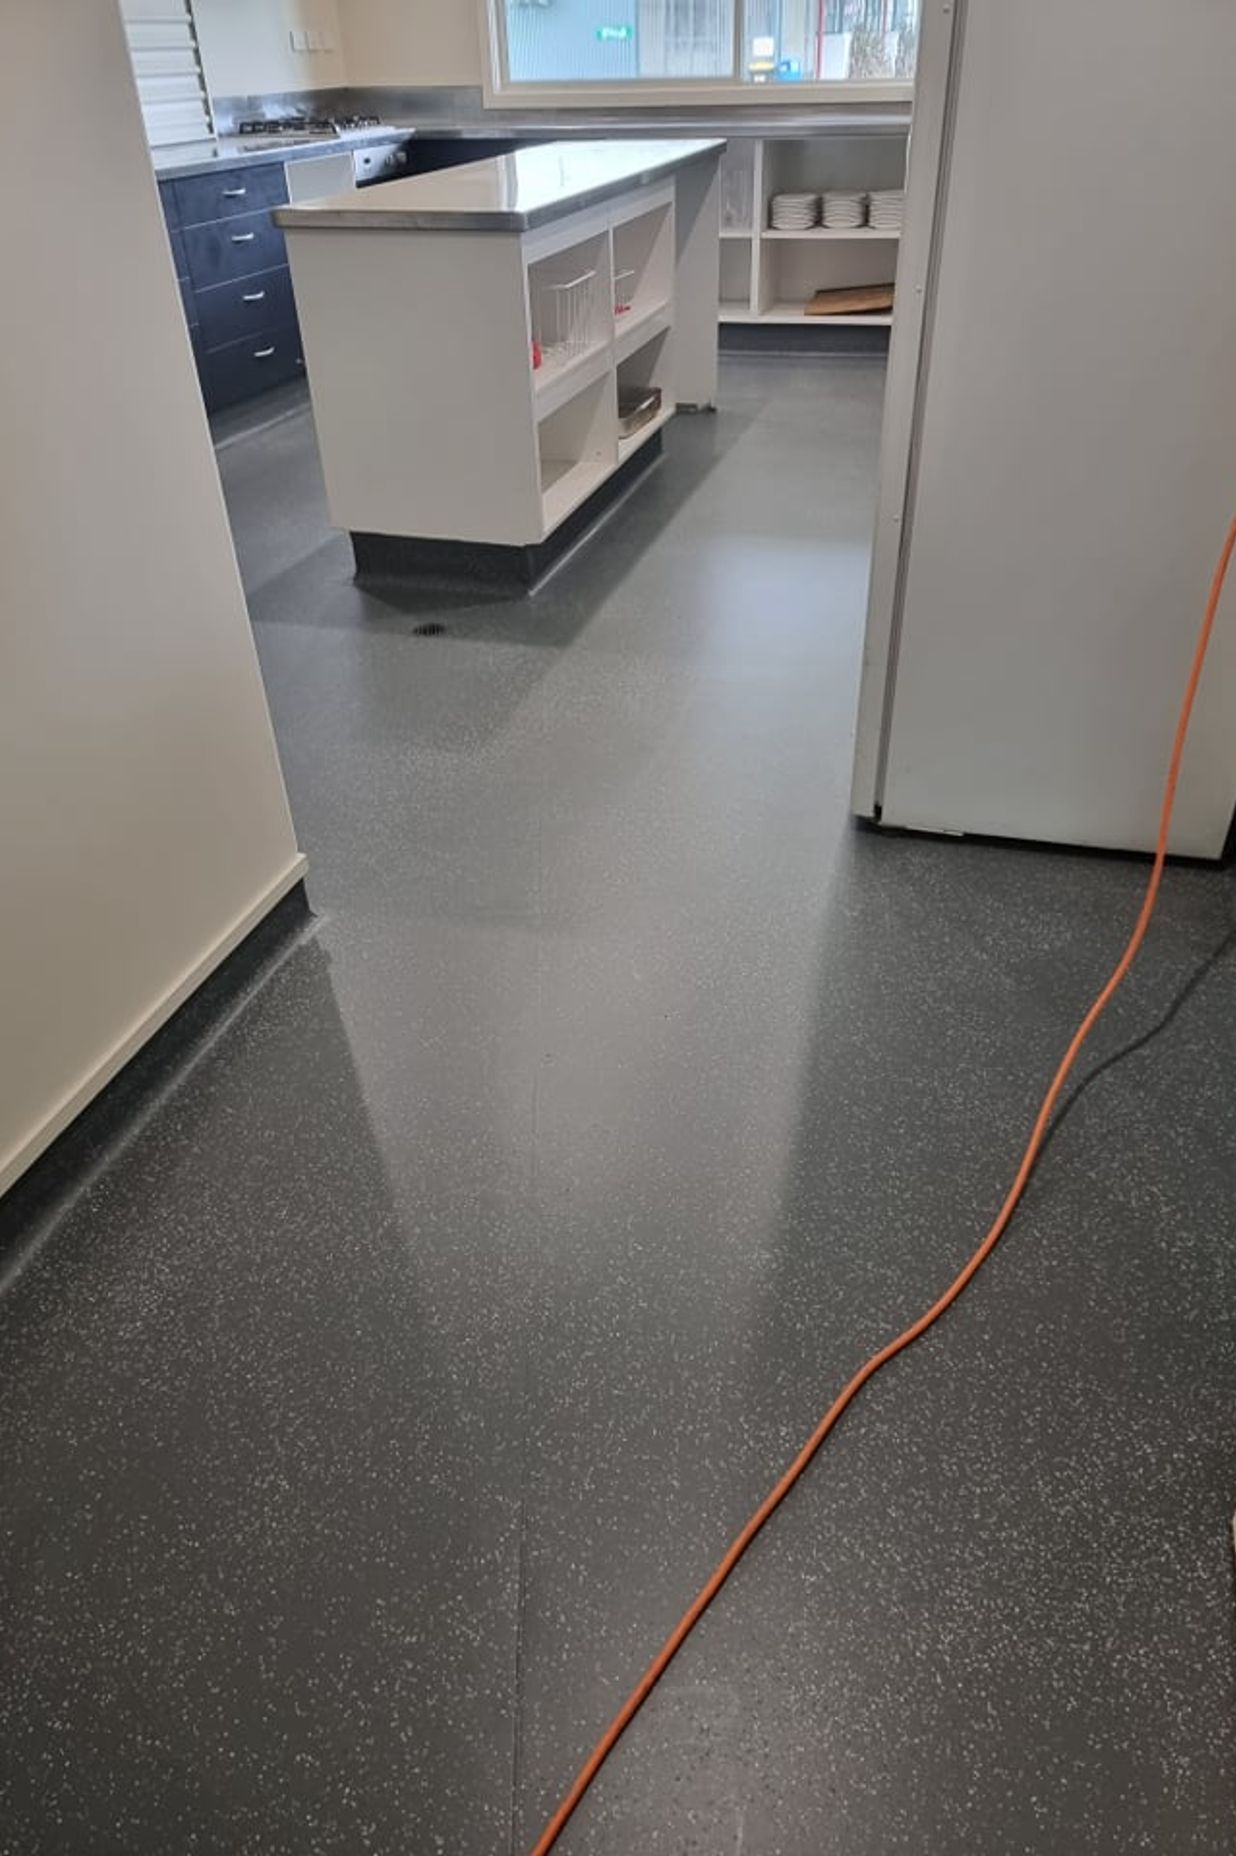 In this commercial kitchen space, a refreshed floor colour with Bona Resilient coating update the space, extending the life of the vinyl for years to come.